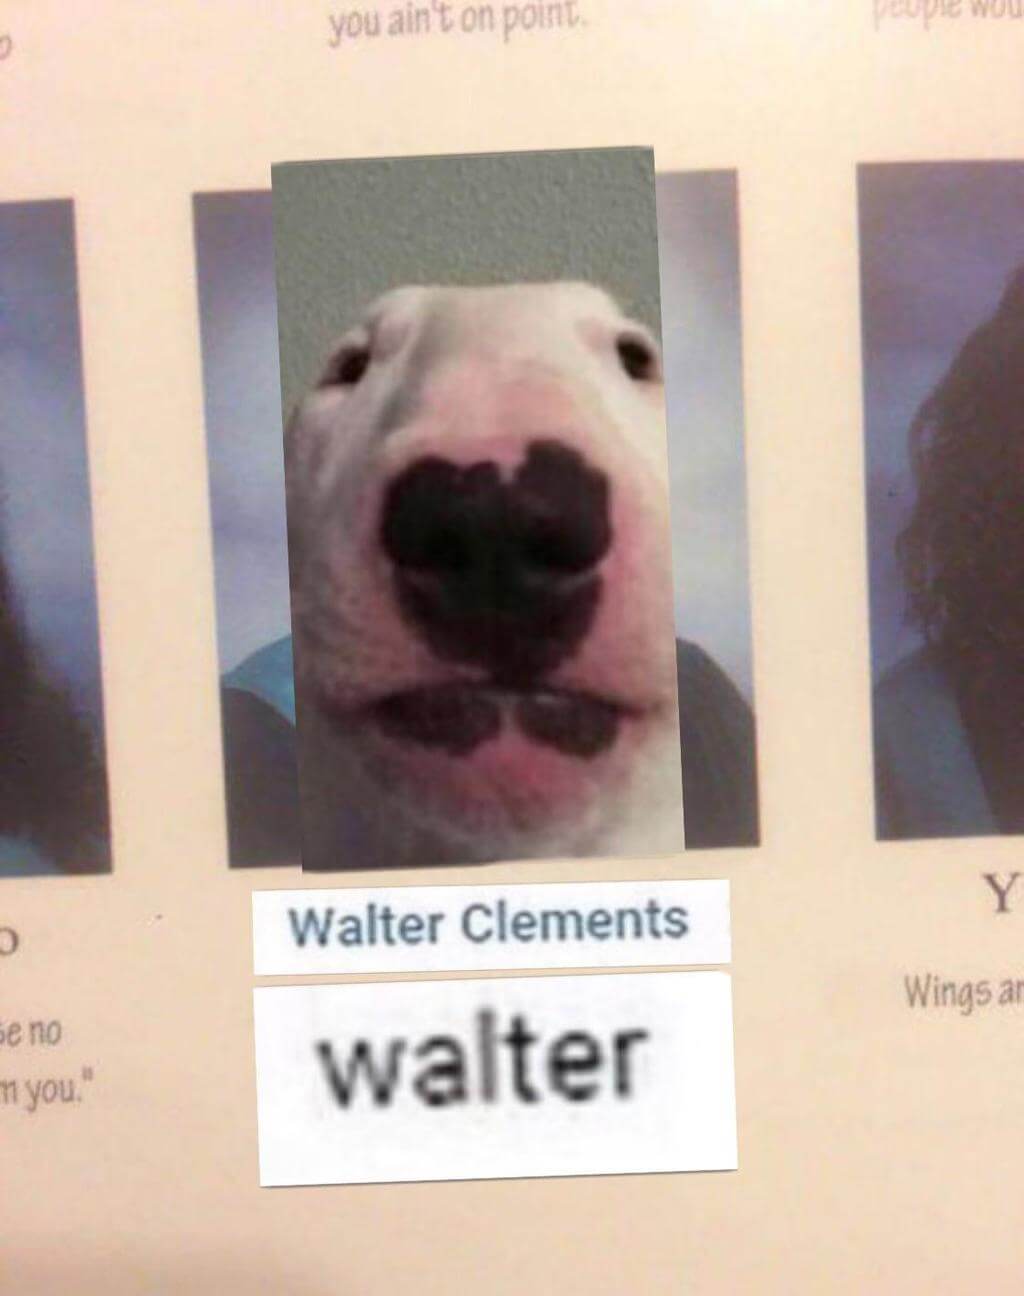 How Did He Get the Name - Walter